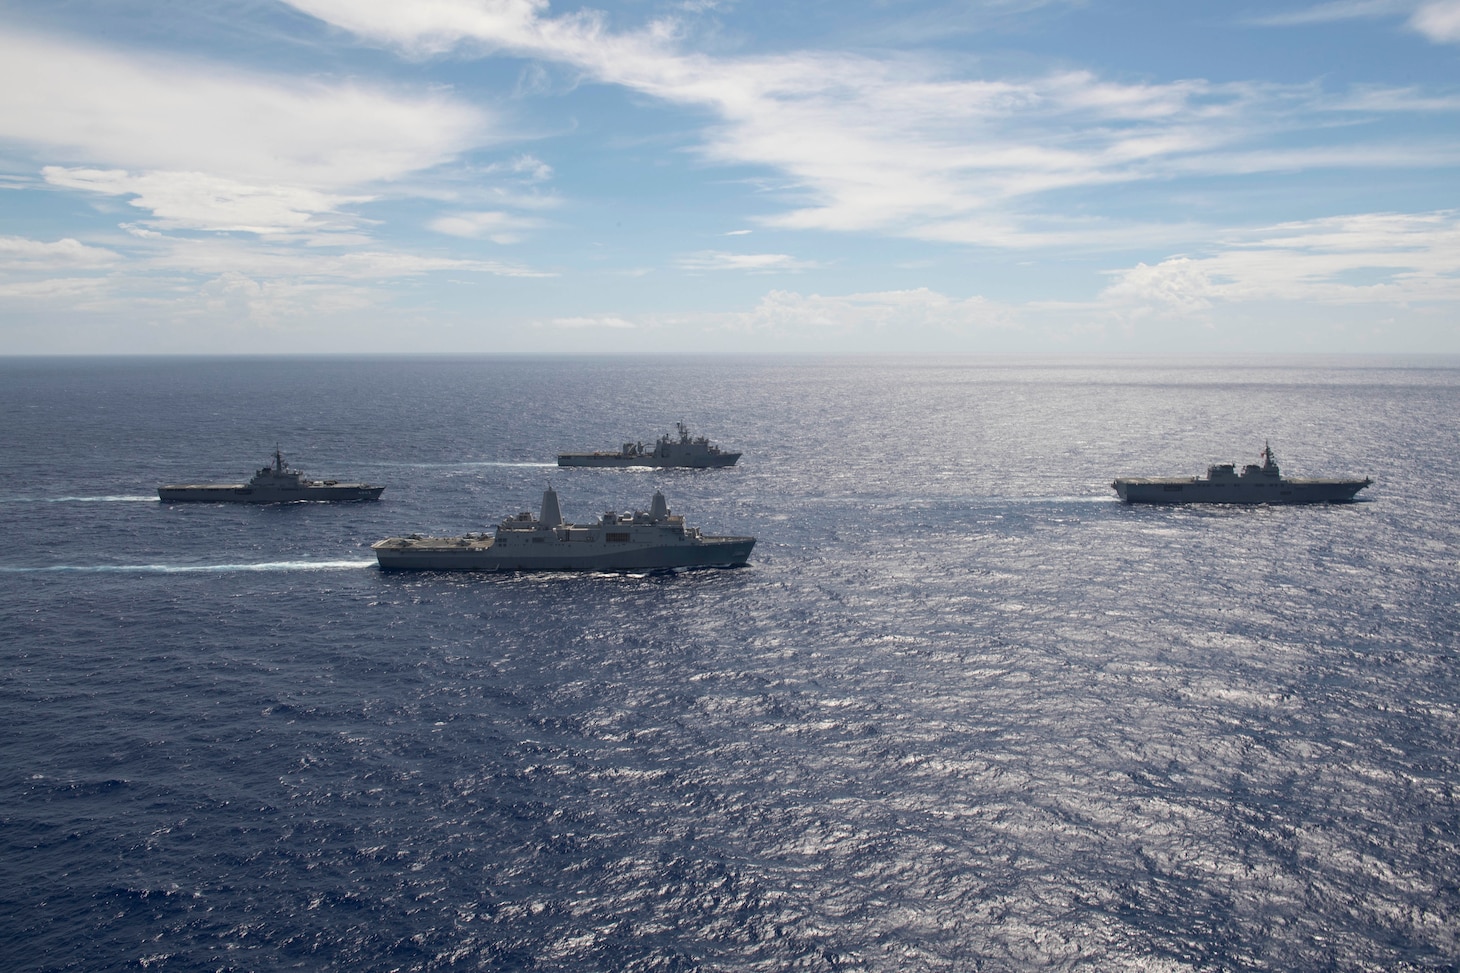 190608-N-BK435-1340 PHILIPPINE SEA (June 8, 2019) – The San Antonio-Class amphibious transport dock USS Green Bay (LPD 20) and Whidbey Island-Class dock landing ship USS Ashland (LSD 48) take part in a photo exercise (PHOTOEX) with Japanese helicopter destroyer JS Ise (DDH-182) and Ousumi-Class tank landing ship JS Kunisaki (LST 4003) during a bilateral transit.  The Wasp Amphibious Ready Group is transiting with JS Ise and JS Kunisaki in the U.S. 7th Fleet area of operations.